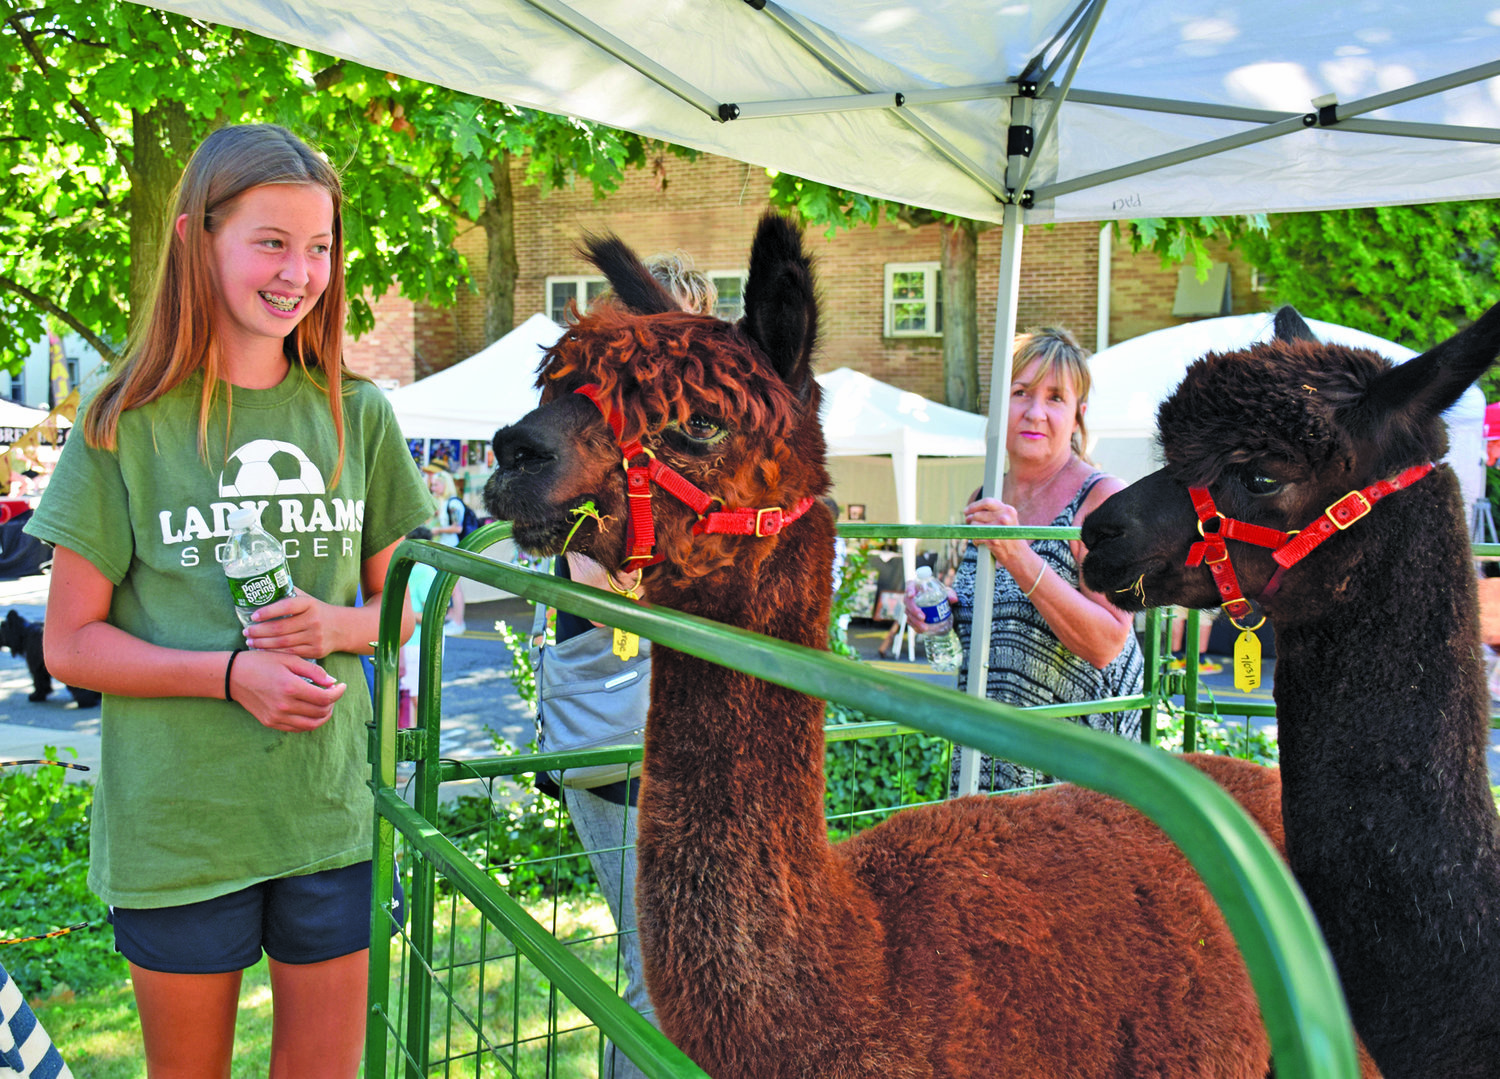 Alyssa Burke, a seventh grader from Hilltown hangs out with Duke and George of Bucks Co. Alpaca Farm.